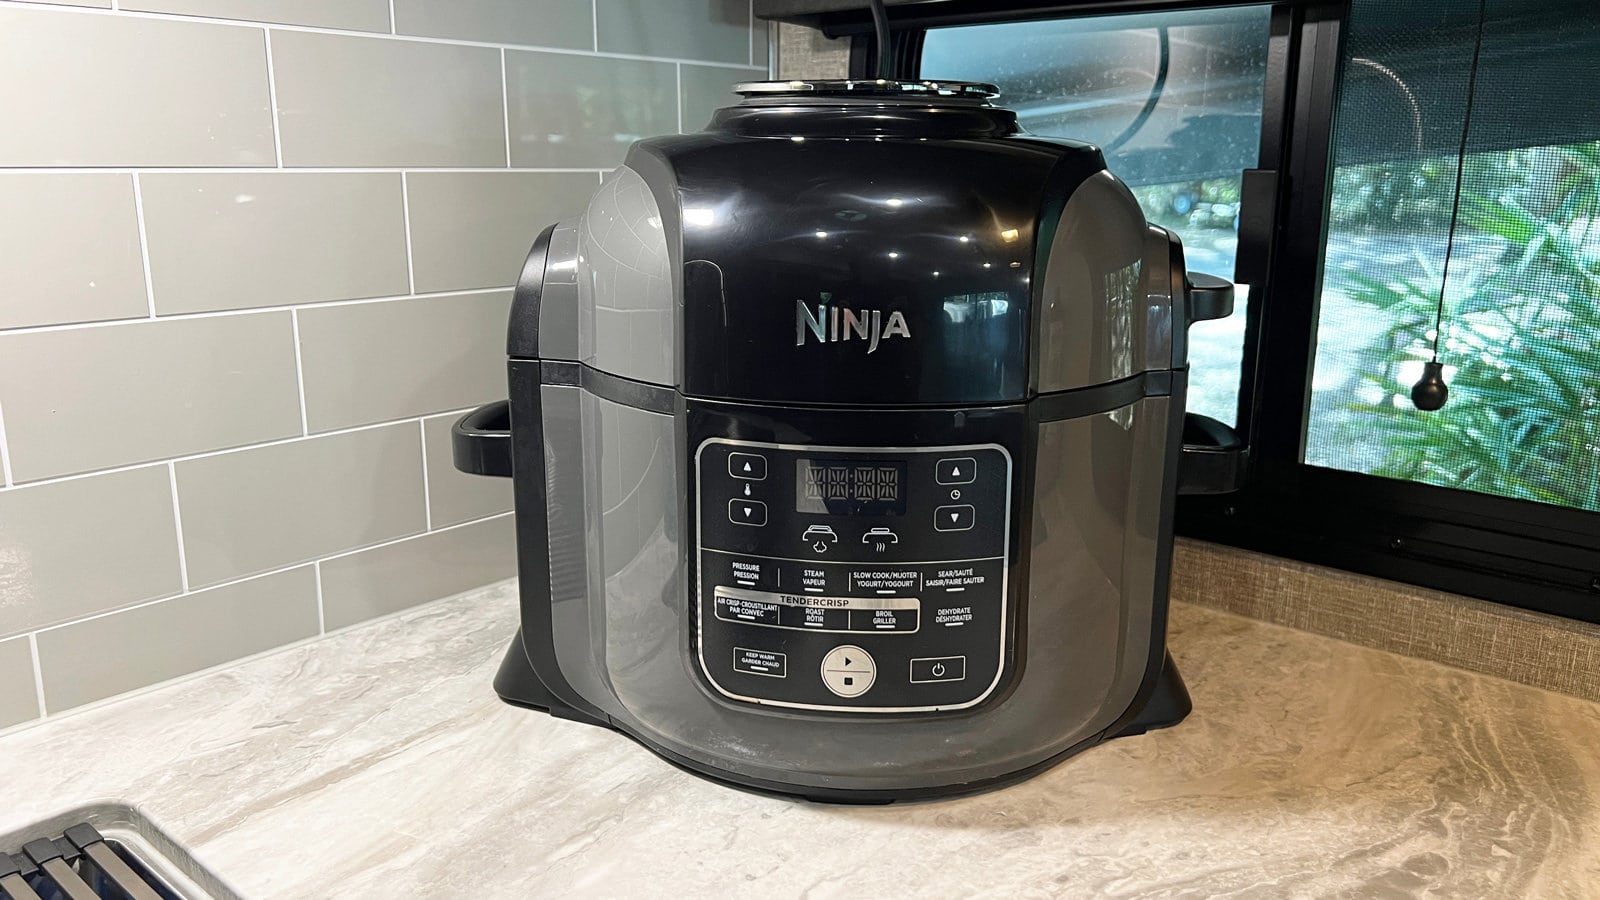 A Ninja Foodi pressure cooker and air fryer is a much used appliance in an RV camper